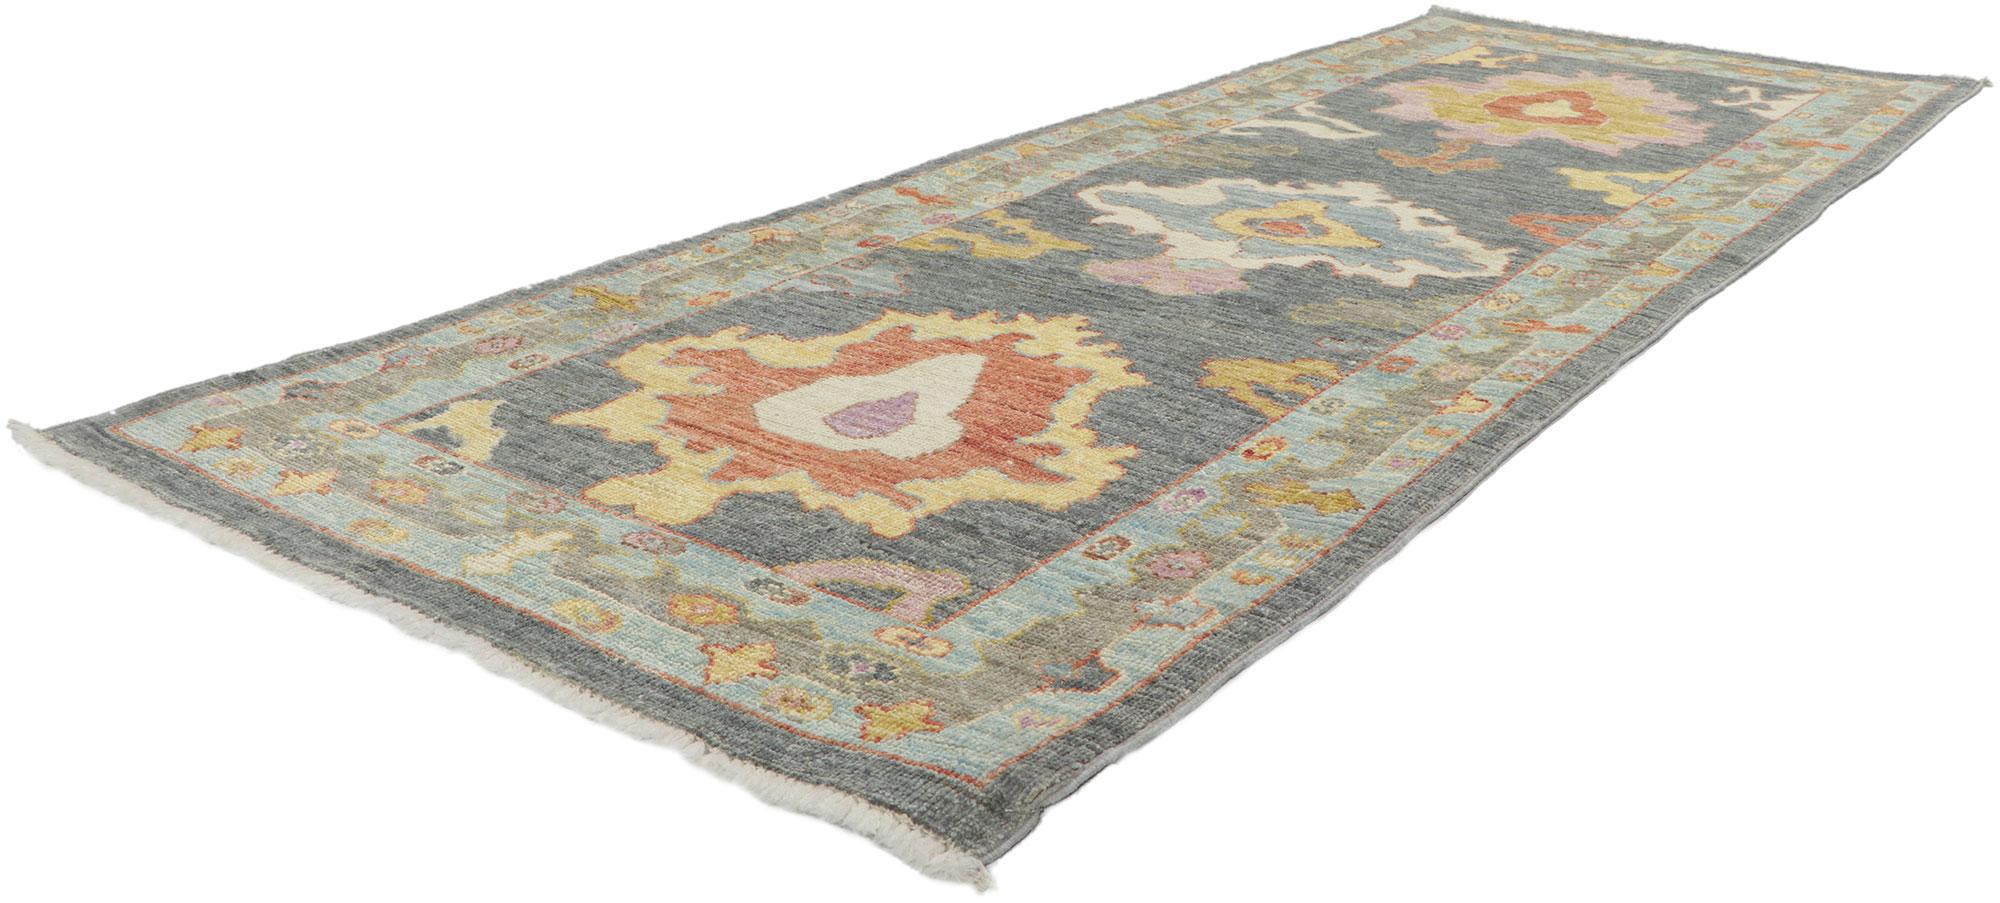 80967 New Modern Style Oushak runner with soft colors, 03'00 x 07'11. Serene and sophisticated, this hand-knotted wool contemporary Contemporary Oushak runner beautifully embodies a modern style. The composition features an all-over botanical